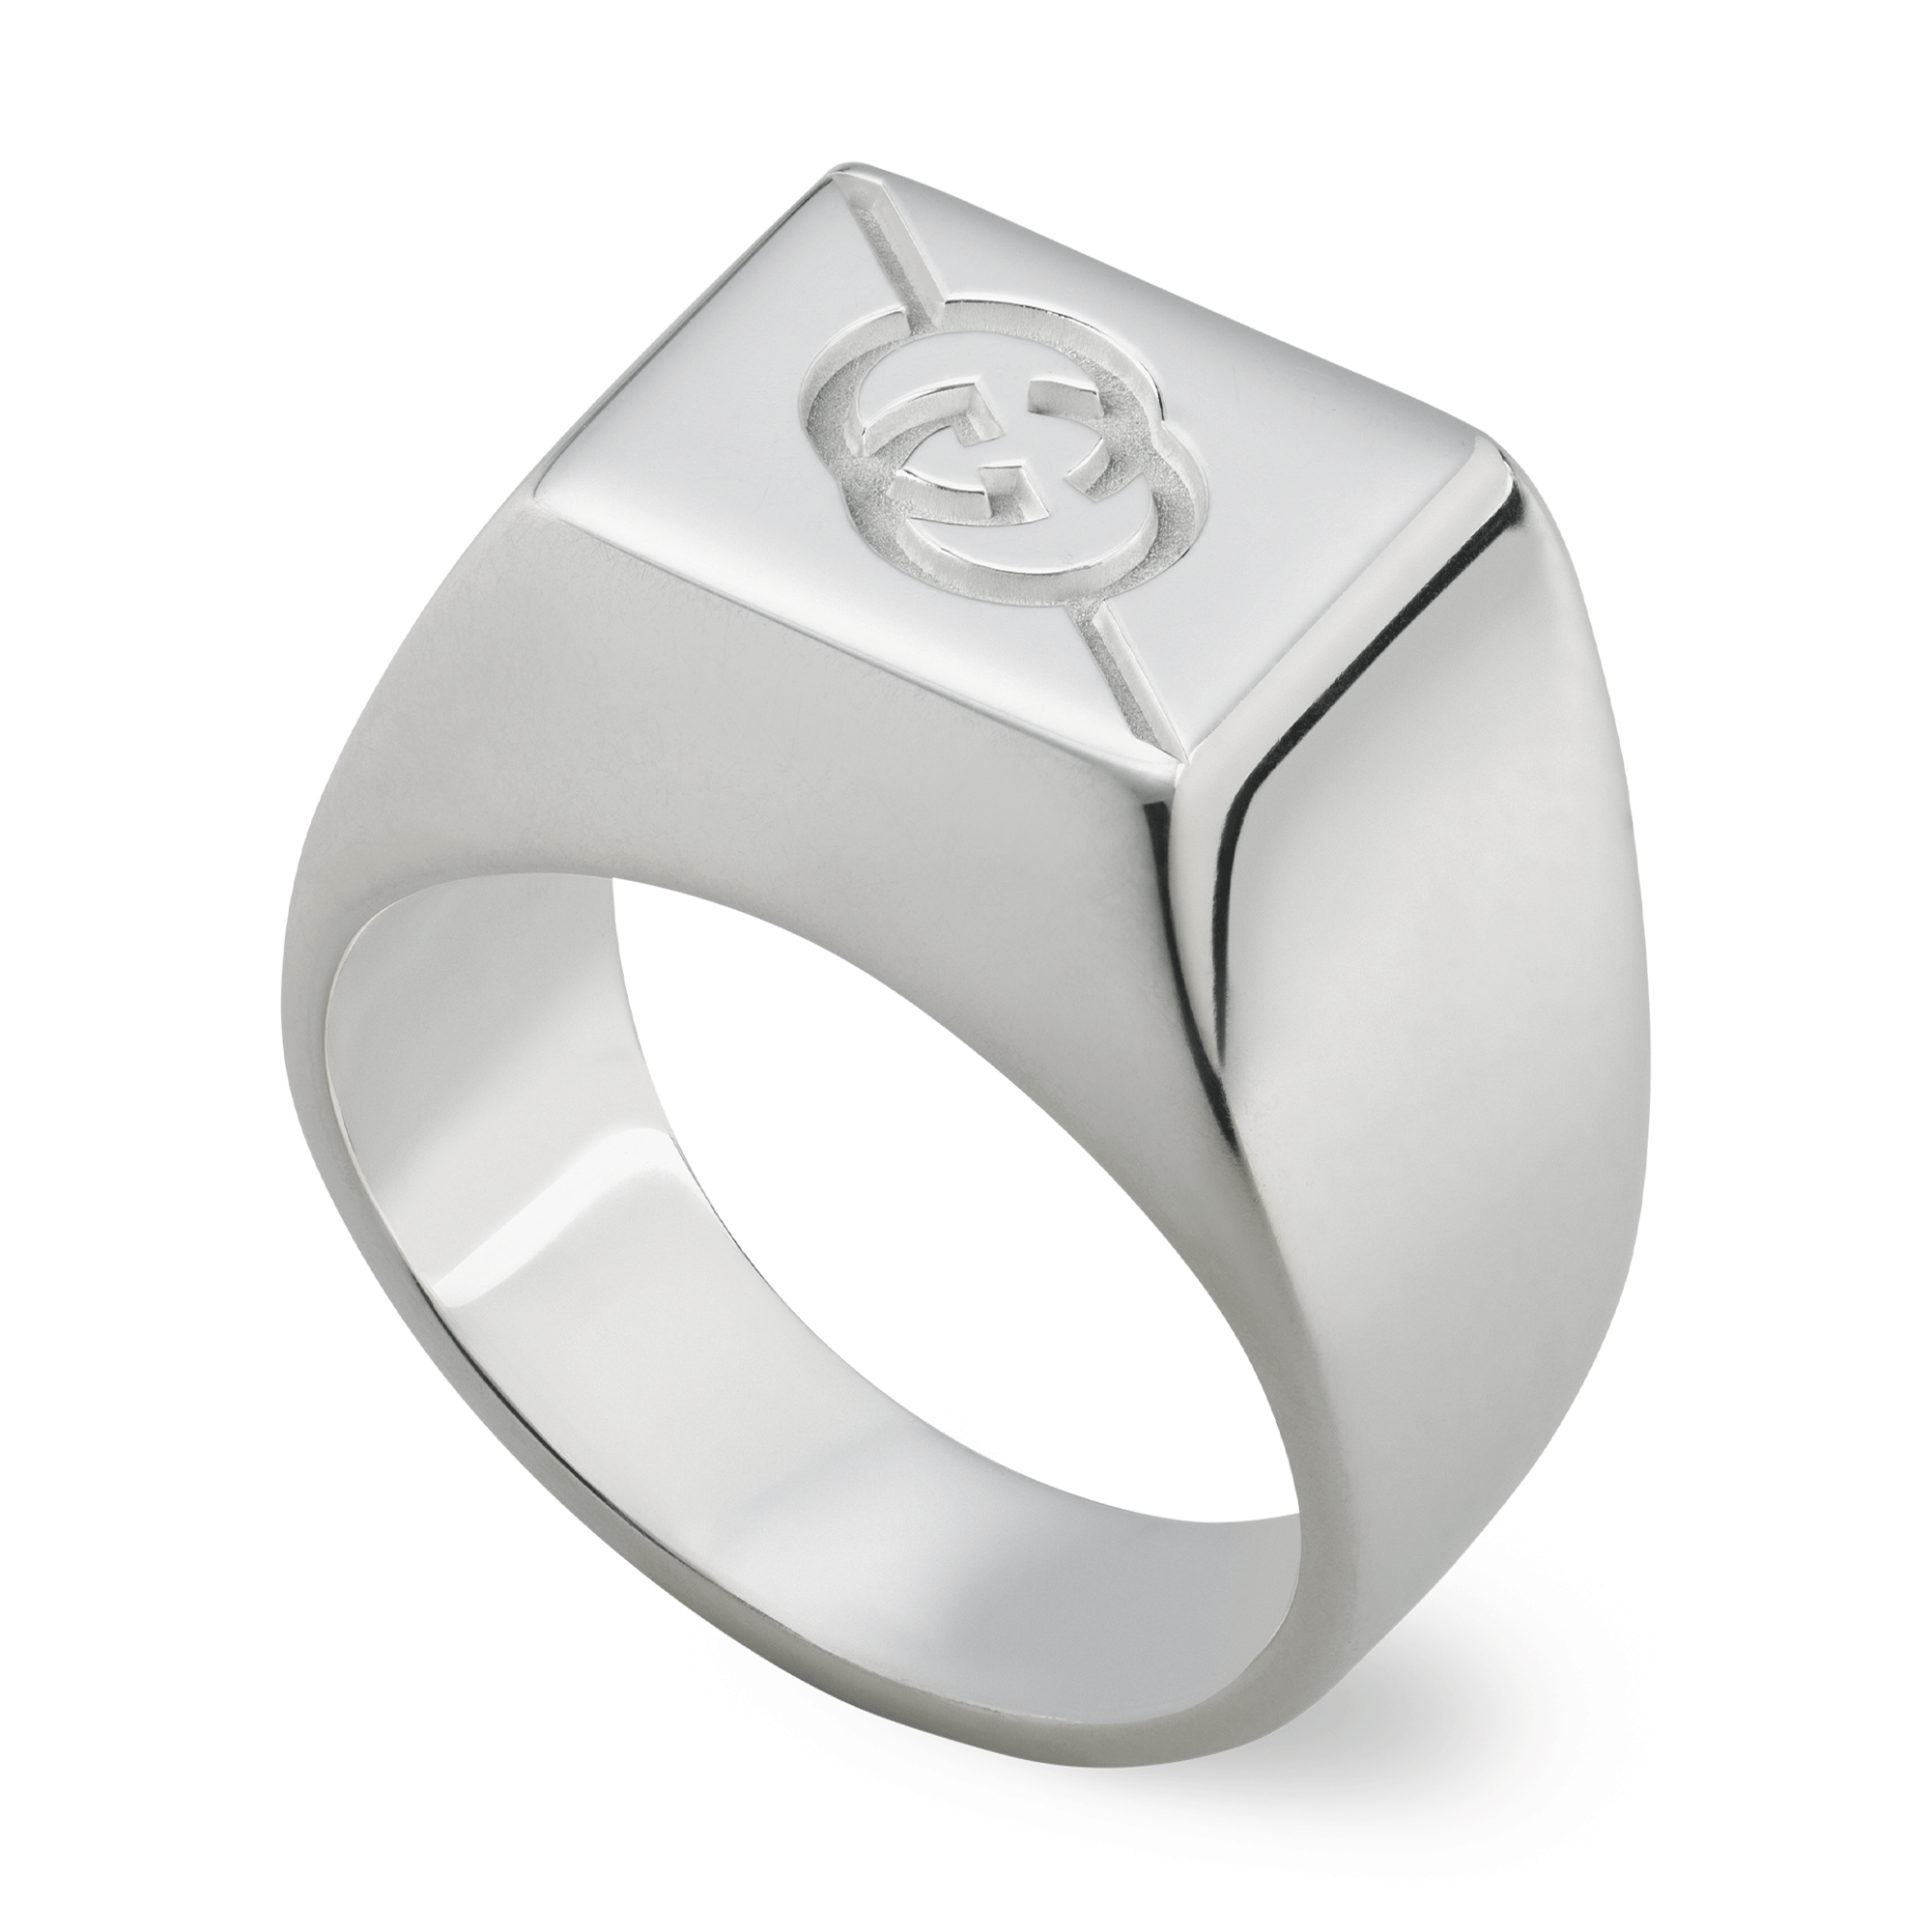 Tag Sterling Silver Square With Interlocking G Logo Signet Ring